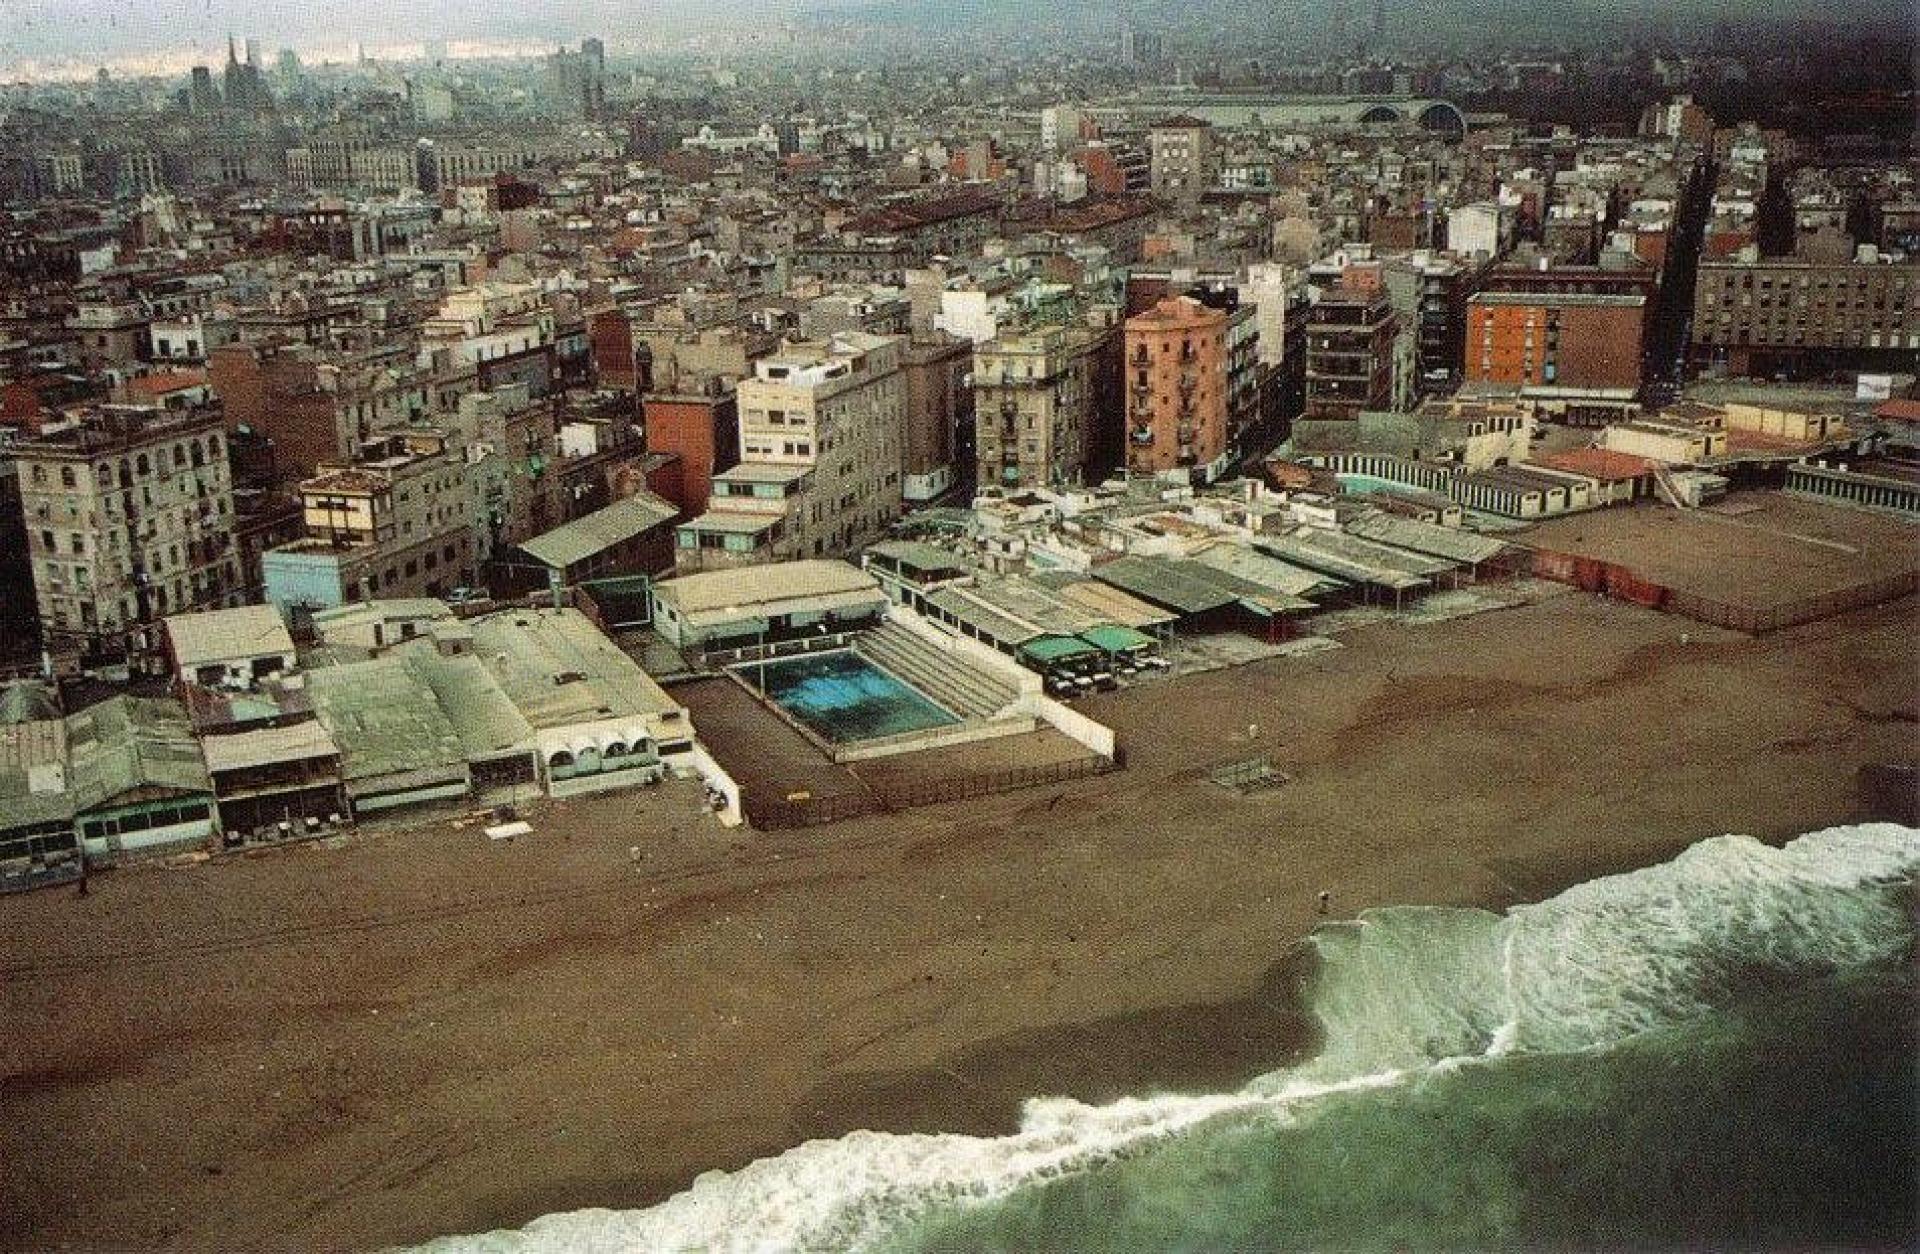 Barcelona waterfront in 1987, before the 1992 Summer Olympic games, was a polluted and abandoned industrial zone. | Photo via Paperblog